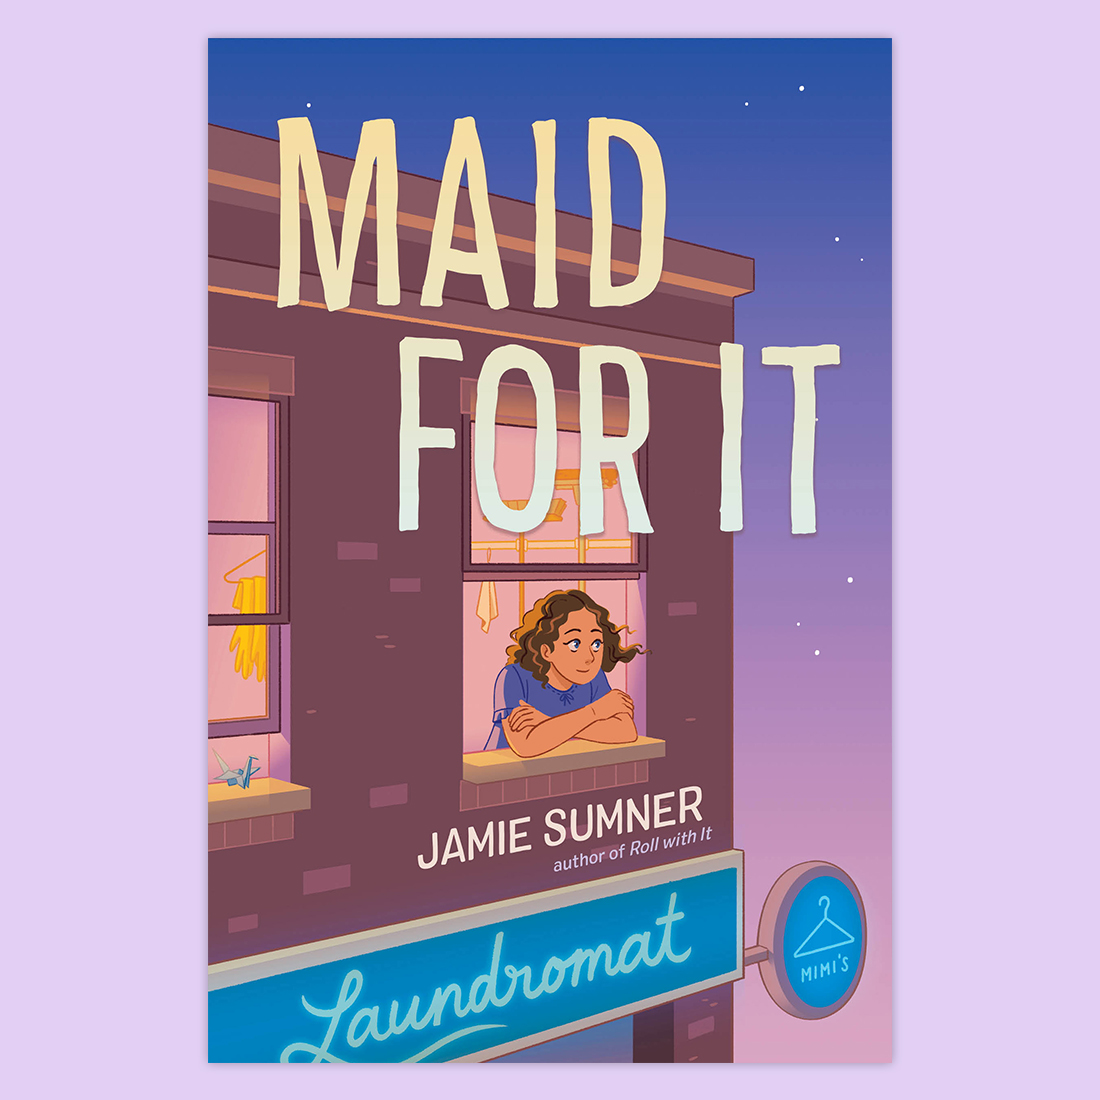 happy book birthday to MAID FOR IT by @jamiesumner_ 🧹💜 in bookstores today!